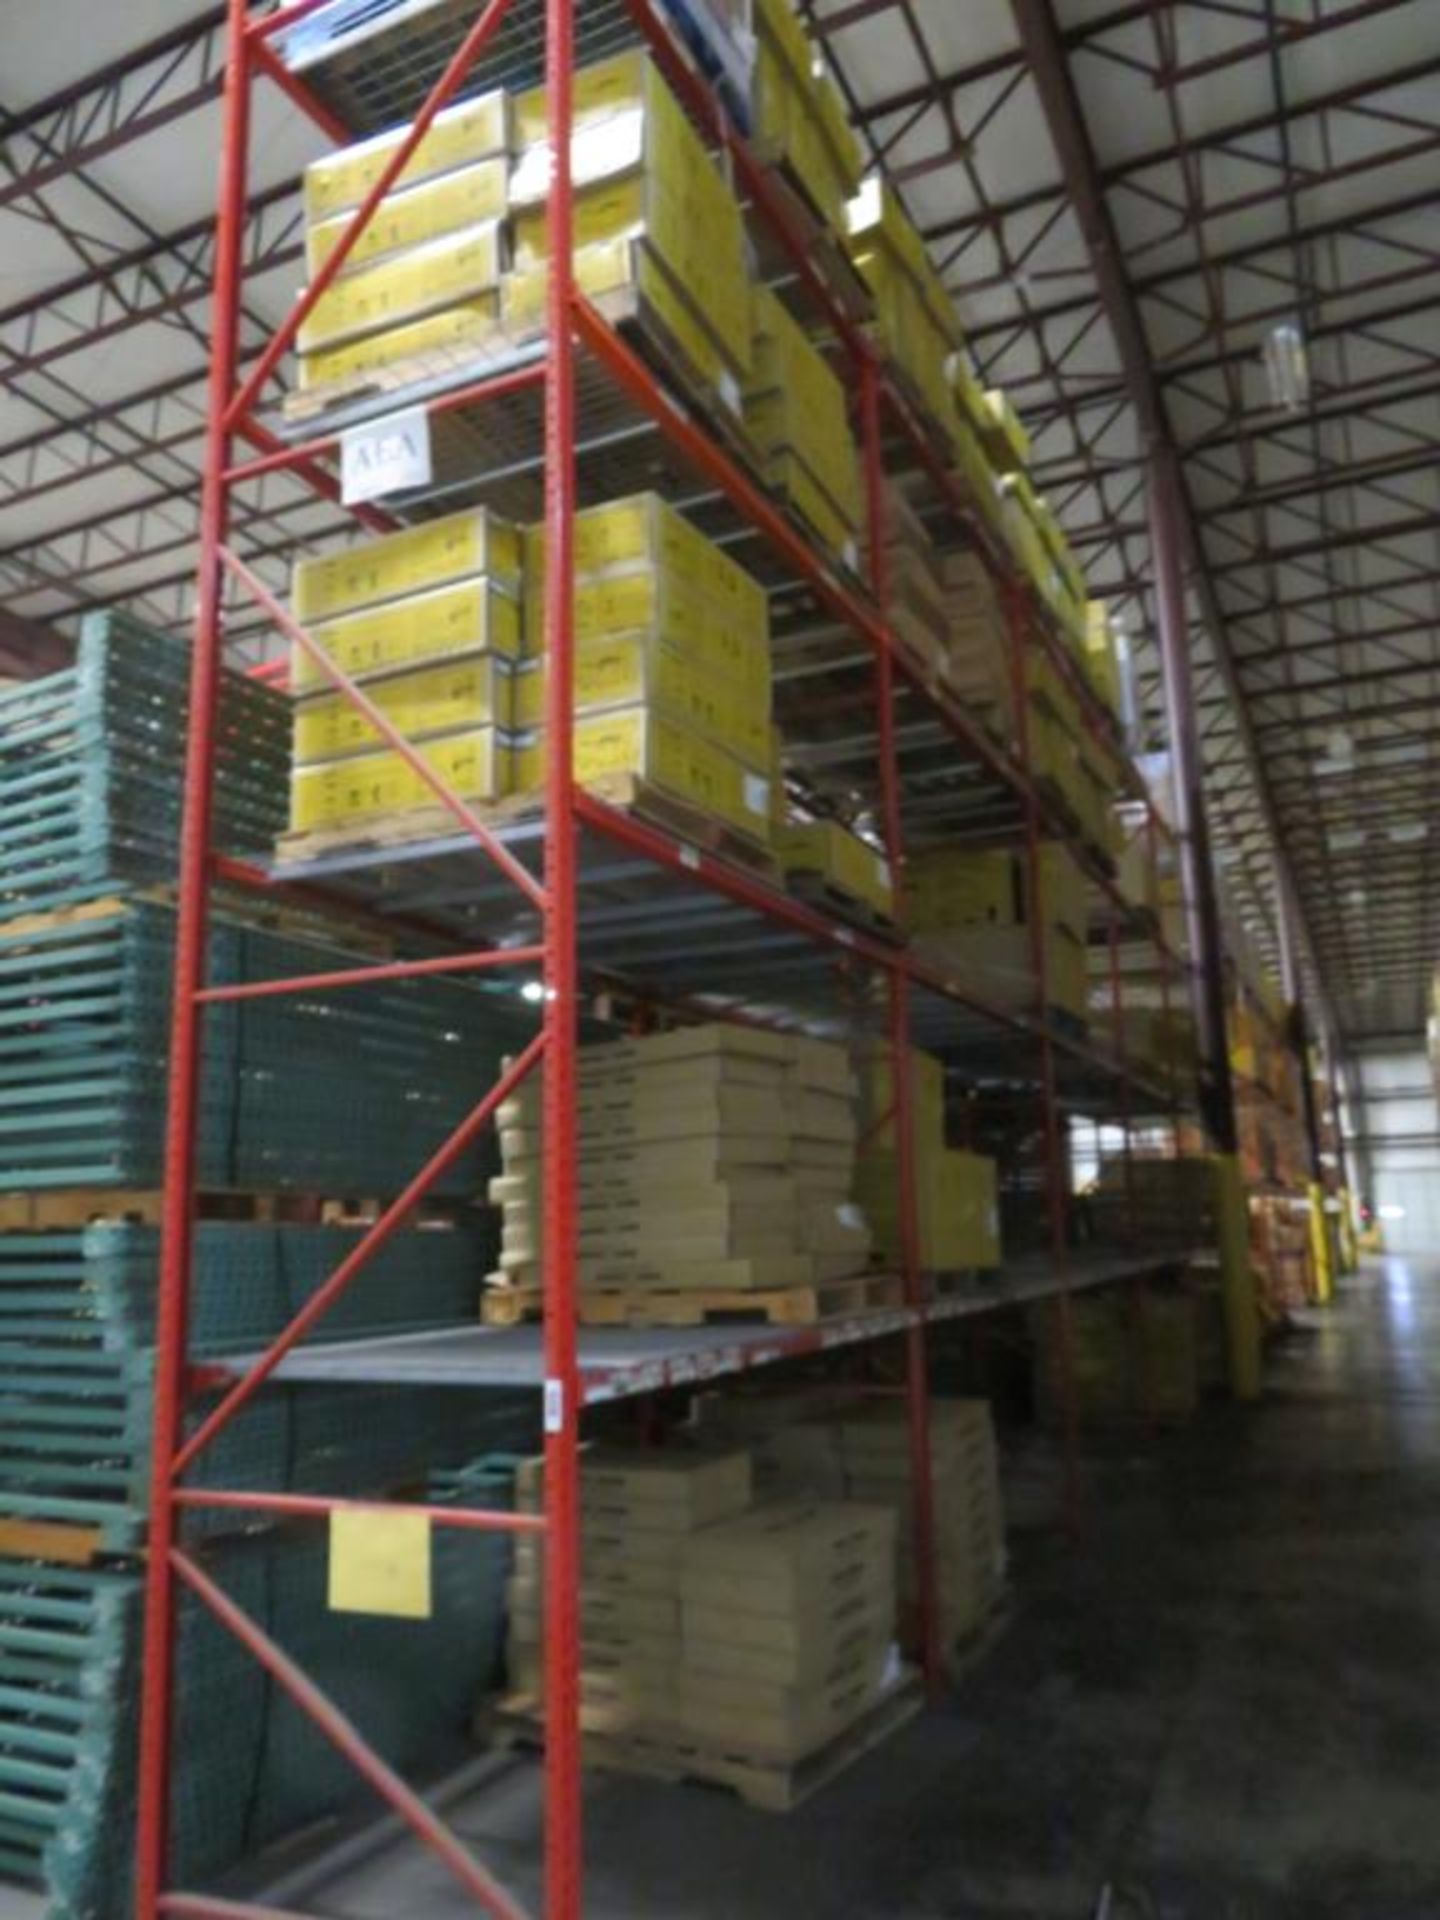 Paltier pallet racking 8 uprights 48" wide and 18' tall, 11 uprights 48" wide and 16' tall, 120